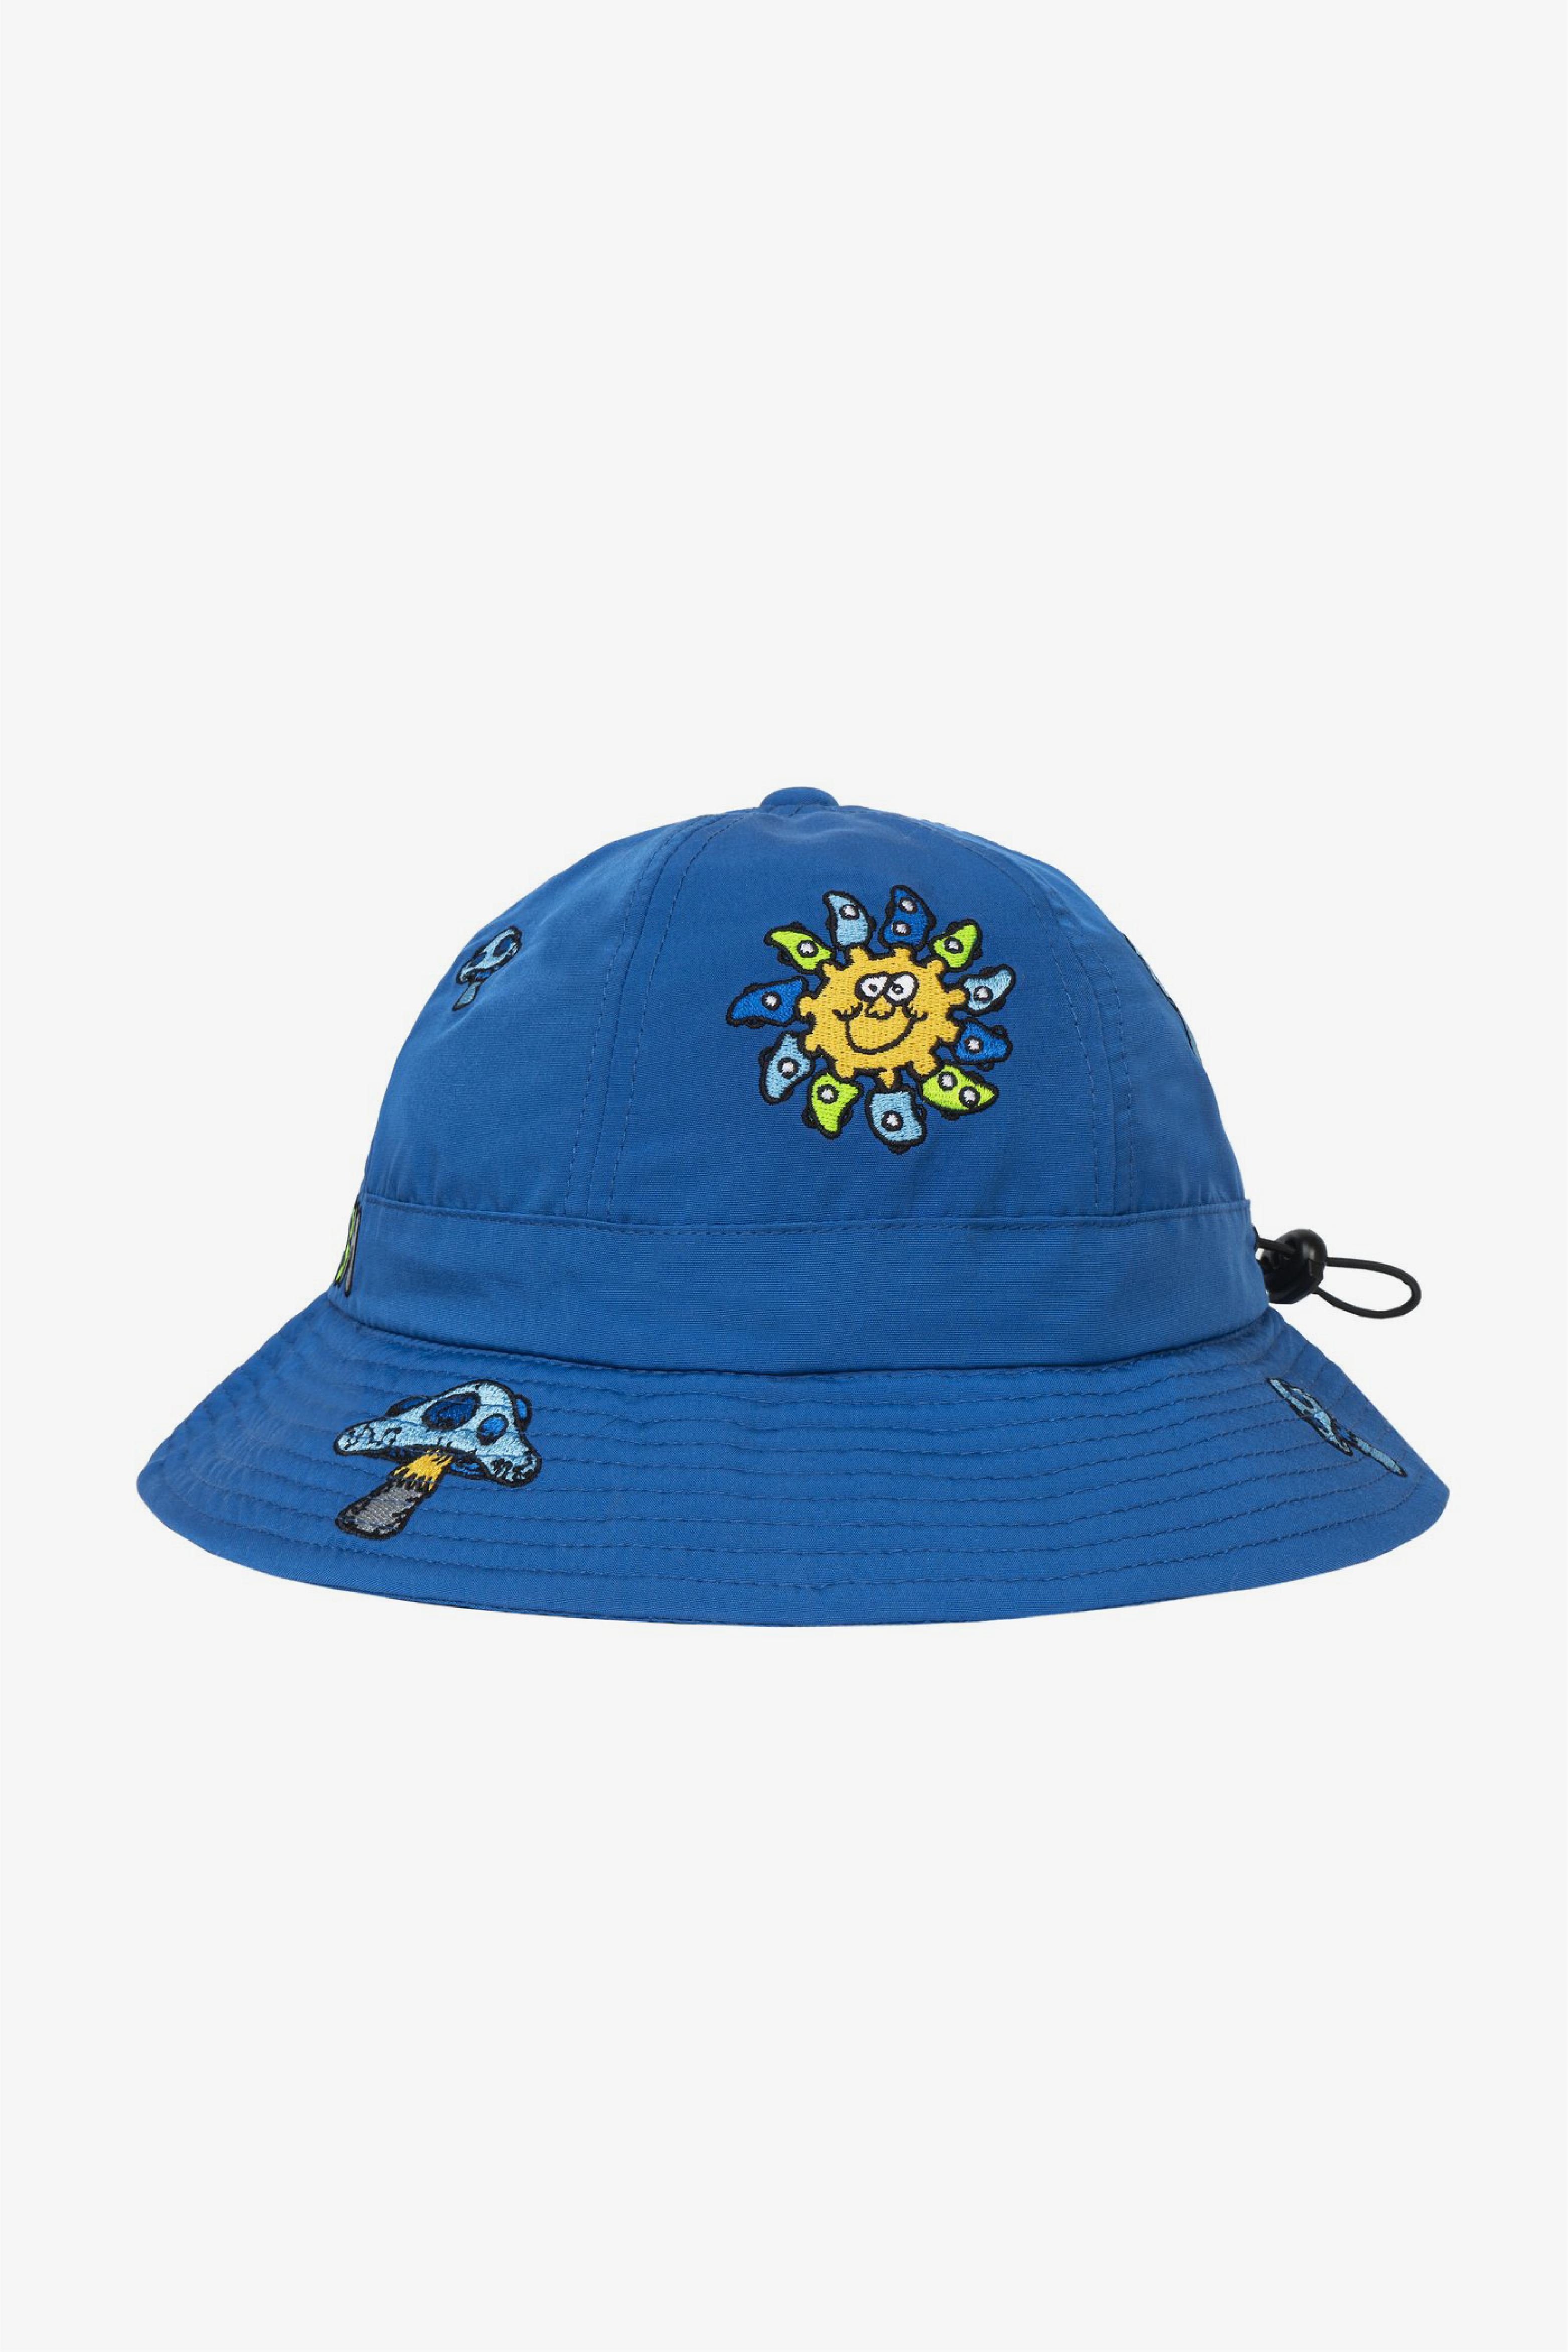 Selectshop FRAME - REAL BAD MAN Delic Embroidered Bucket Hat All-Accessories Dubai